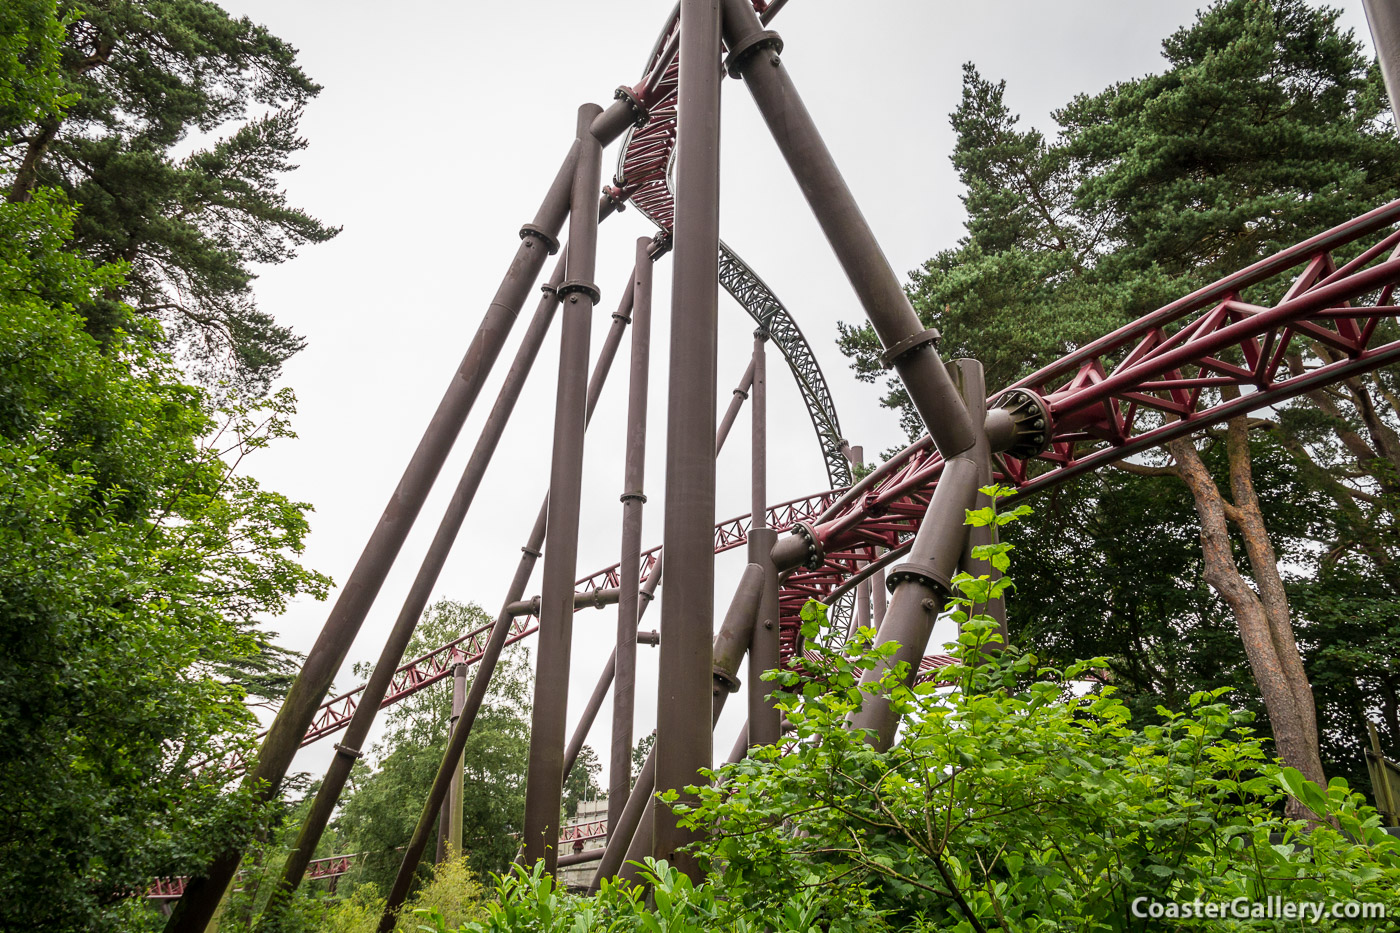 Launched roller coaster - Rita the Queen of Speed at Alton Towers